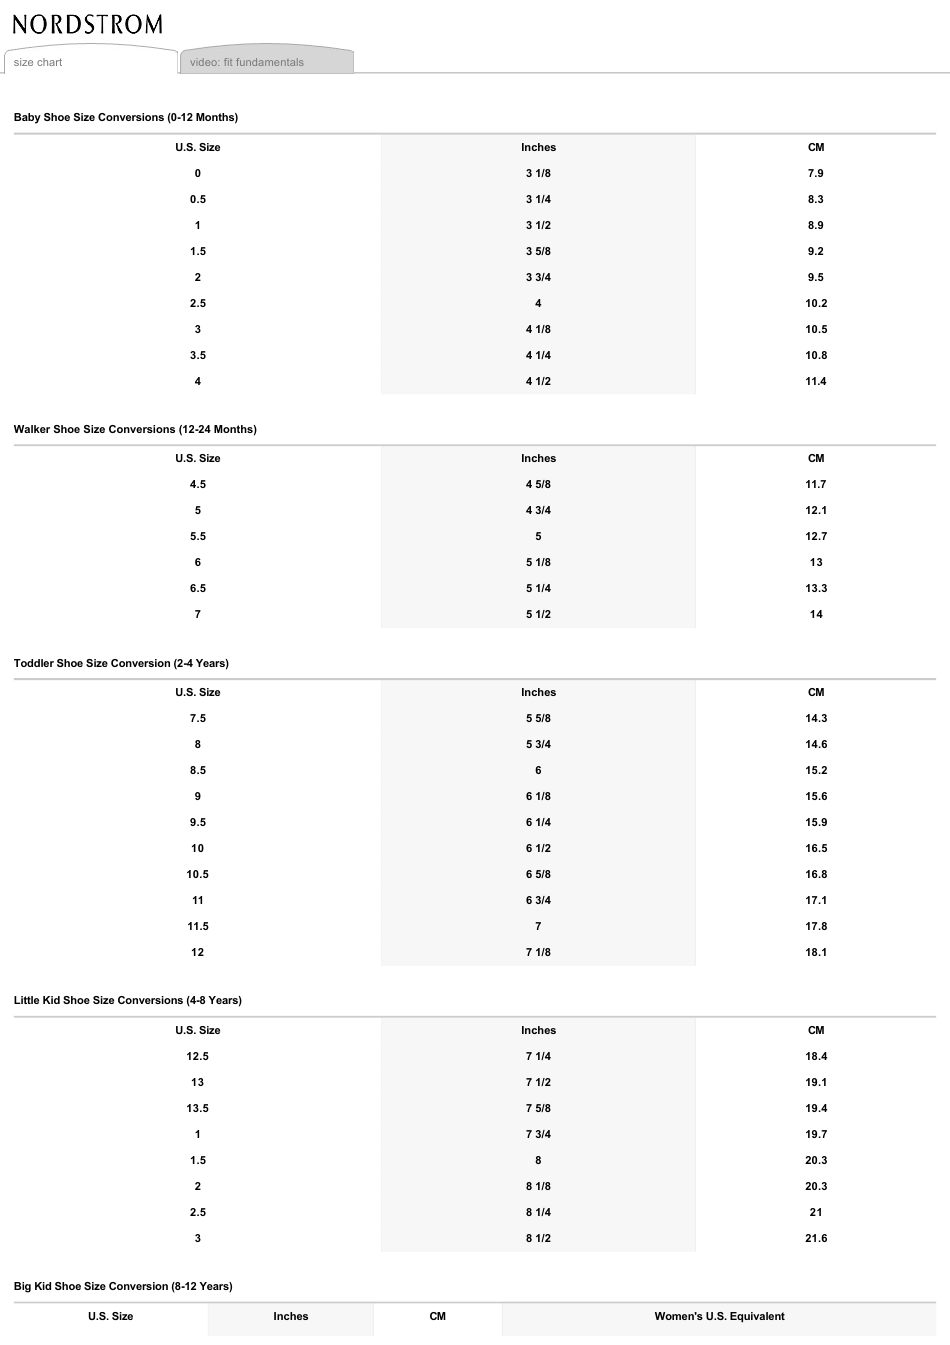 Childrens Shoe Size Conversions Chart - Nordstrom, Page 1